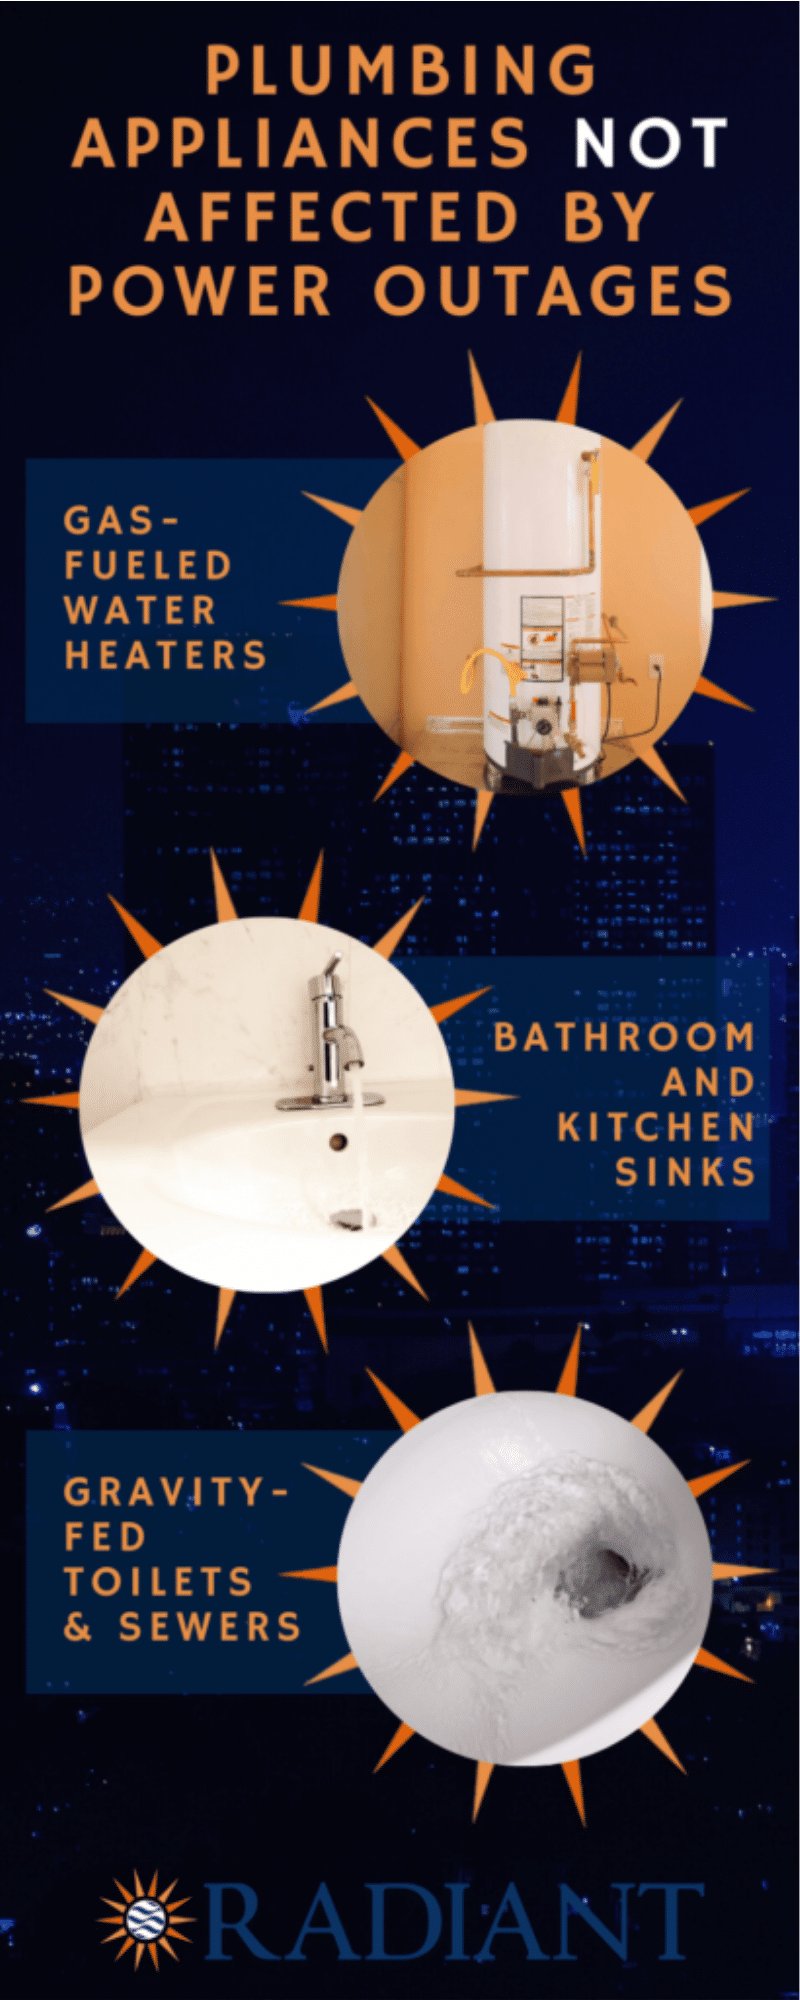 An infographic highlighted the plumbing system appliances that keep working during power outages